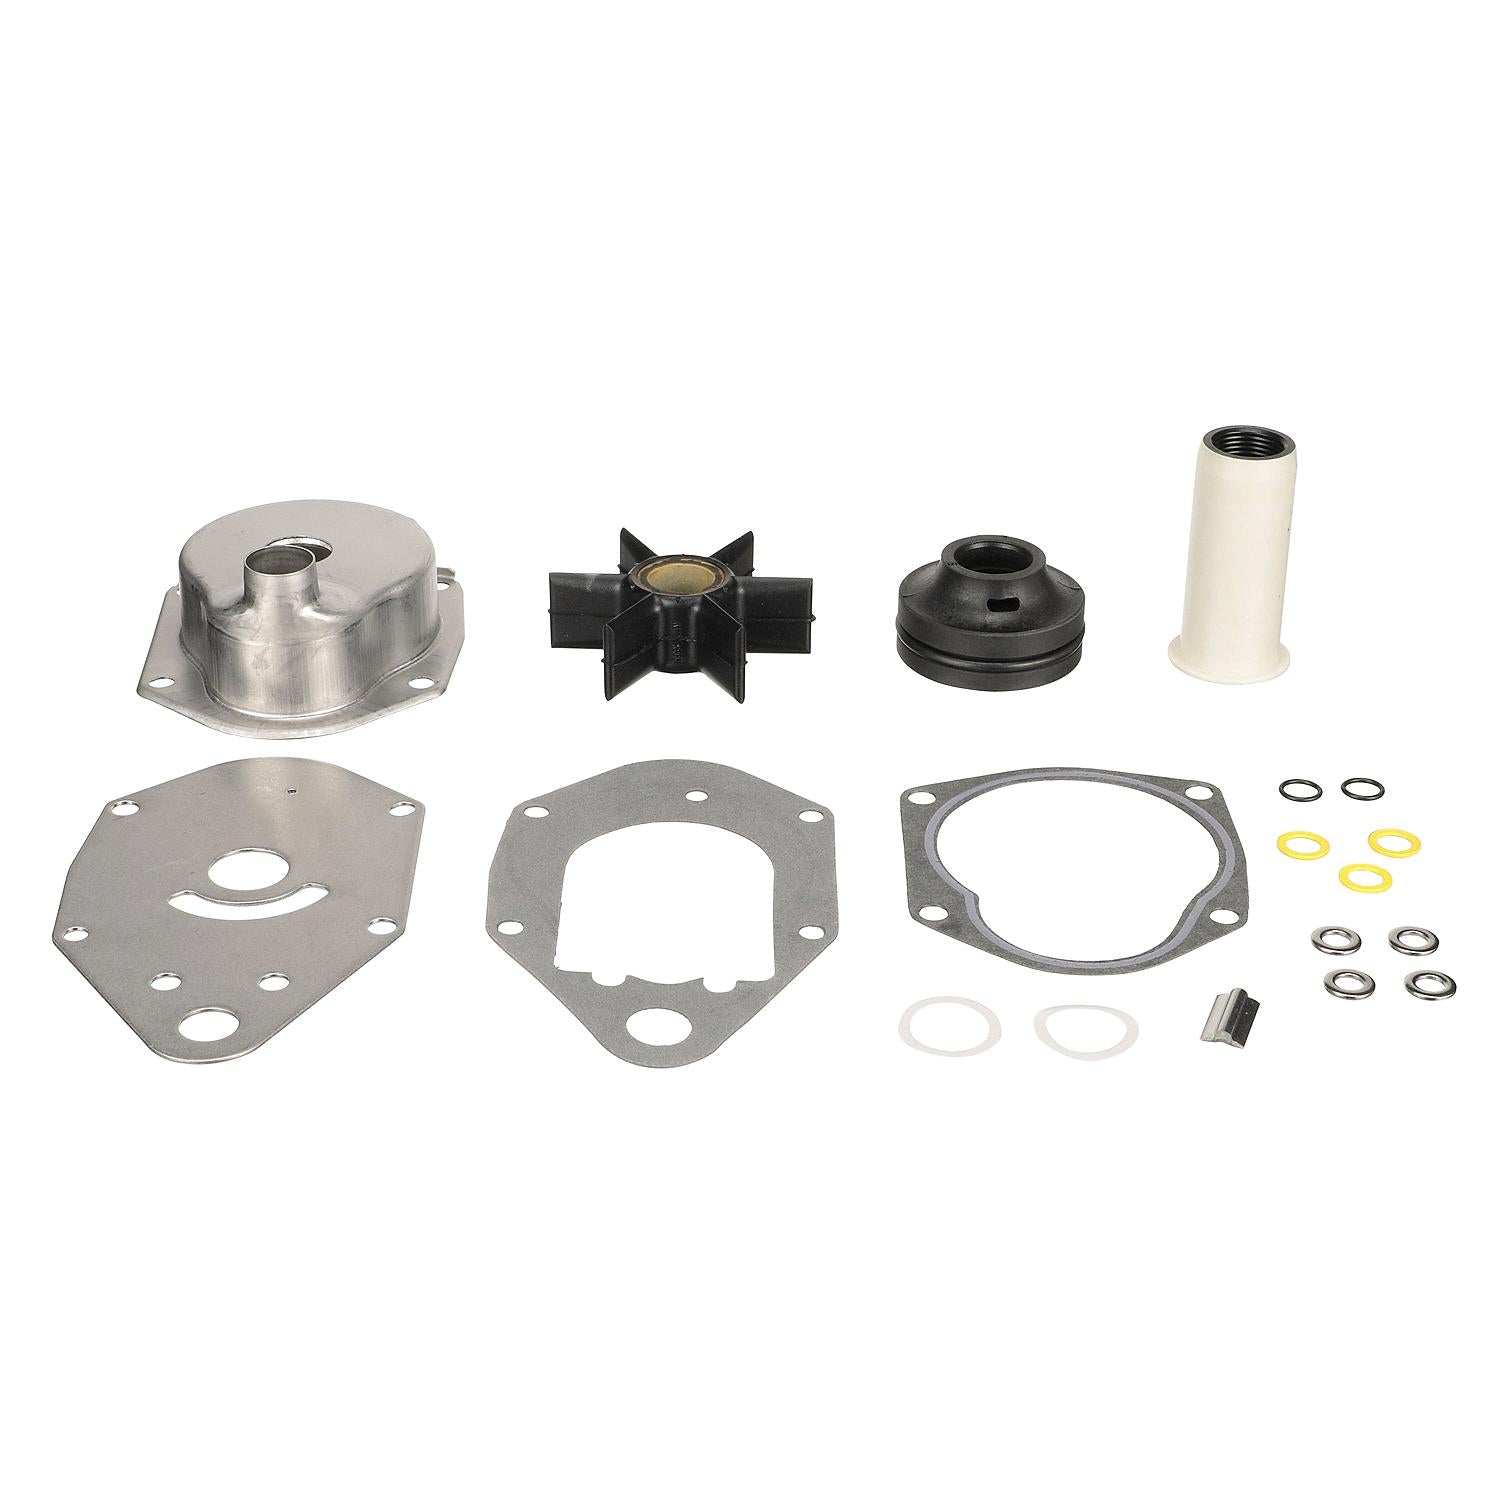 Quicksilver 812966A12 Water Pump Repair Kit for Mercury and Mariner 4-Stroke 30-60 HP Outboards